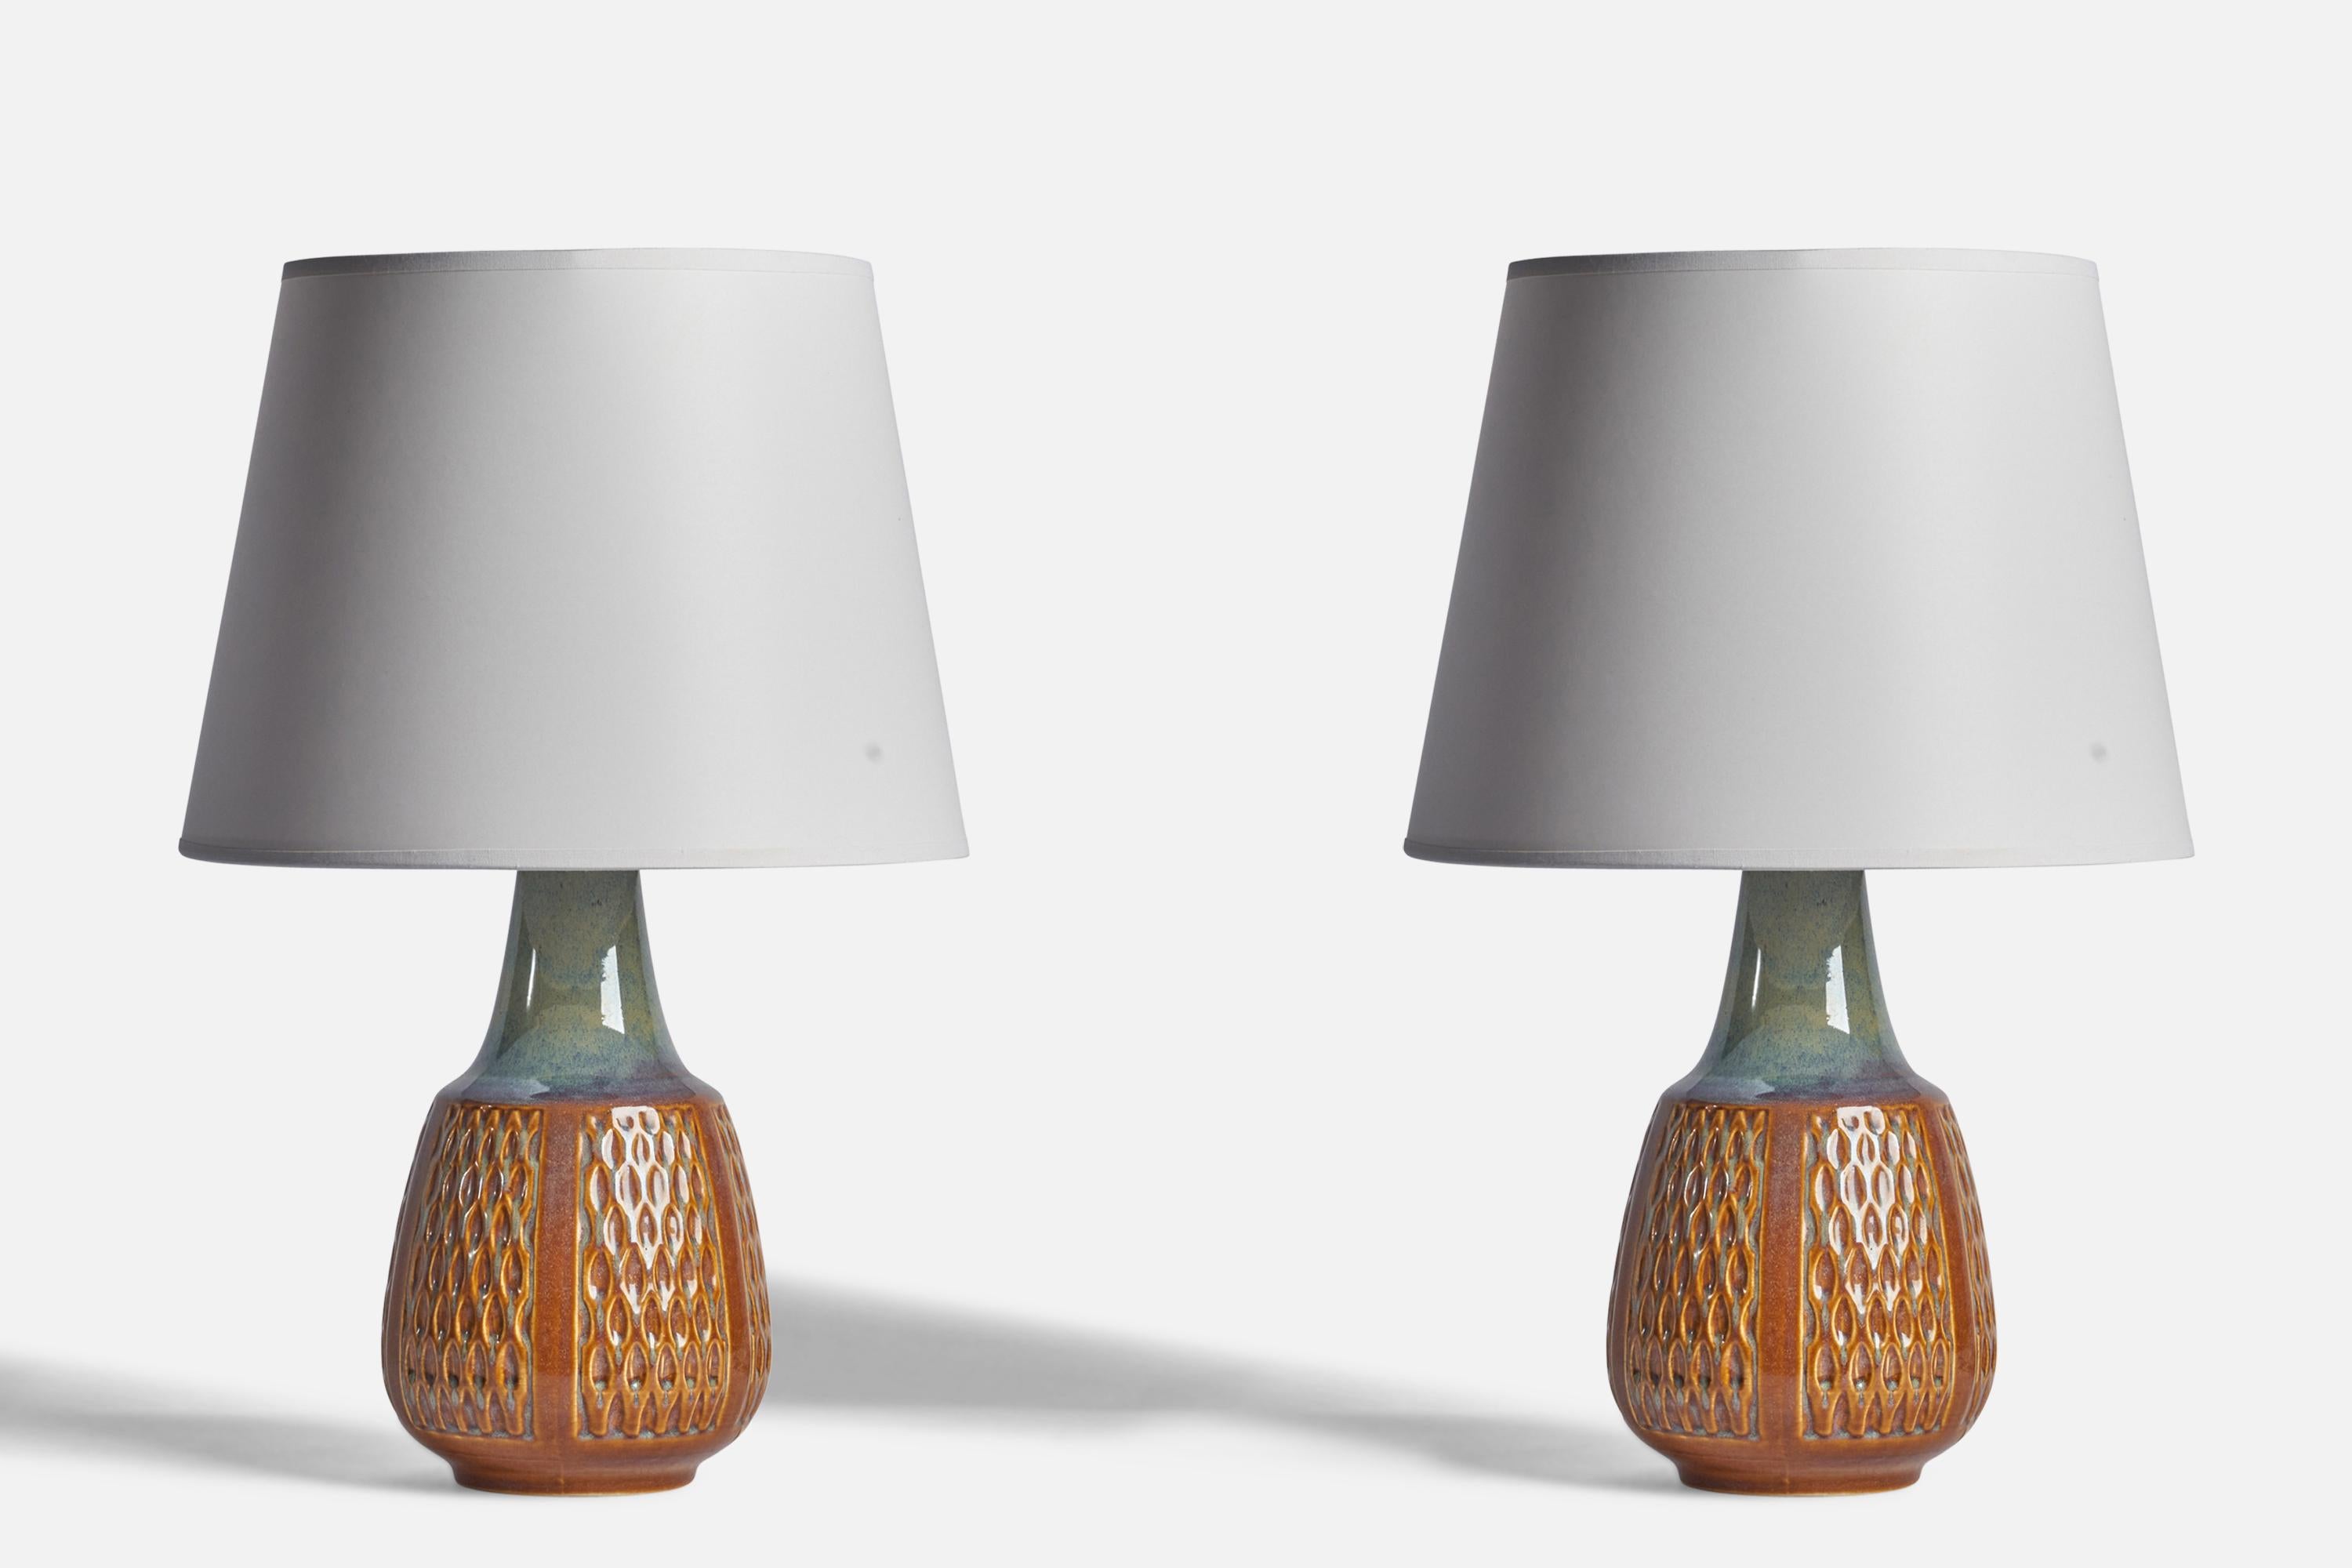 A pair of blue and brown-glazed stoneware table lamps designed and produced by Søholm, Bornholm, Denmark, c. 1960s.

Dimensions of Lamp (inches): 13.5” H x 6” Diameter
Dimensions of Shade (inches): 9” Top Diameter x 12” Bottom Diameter x 9”